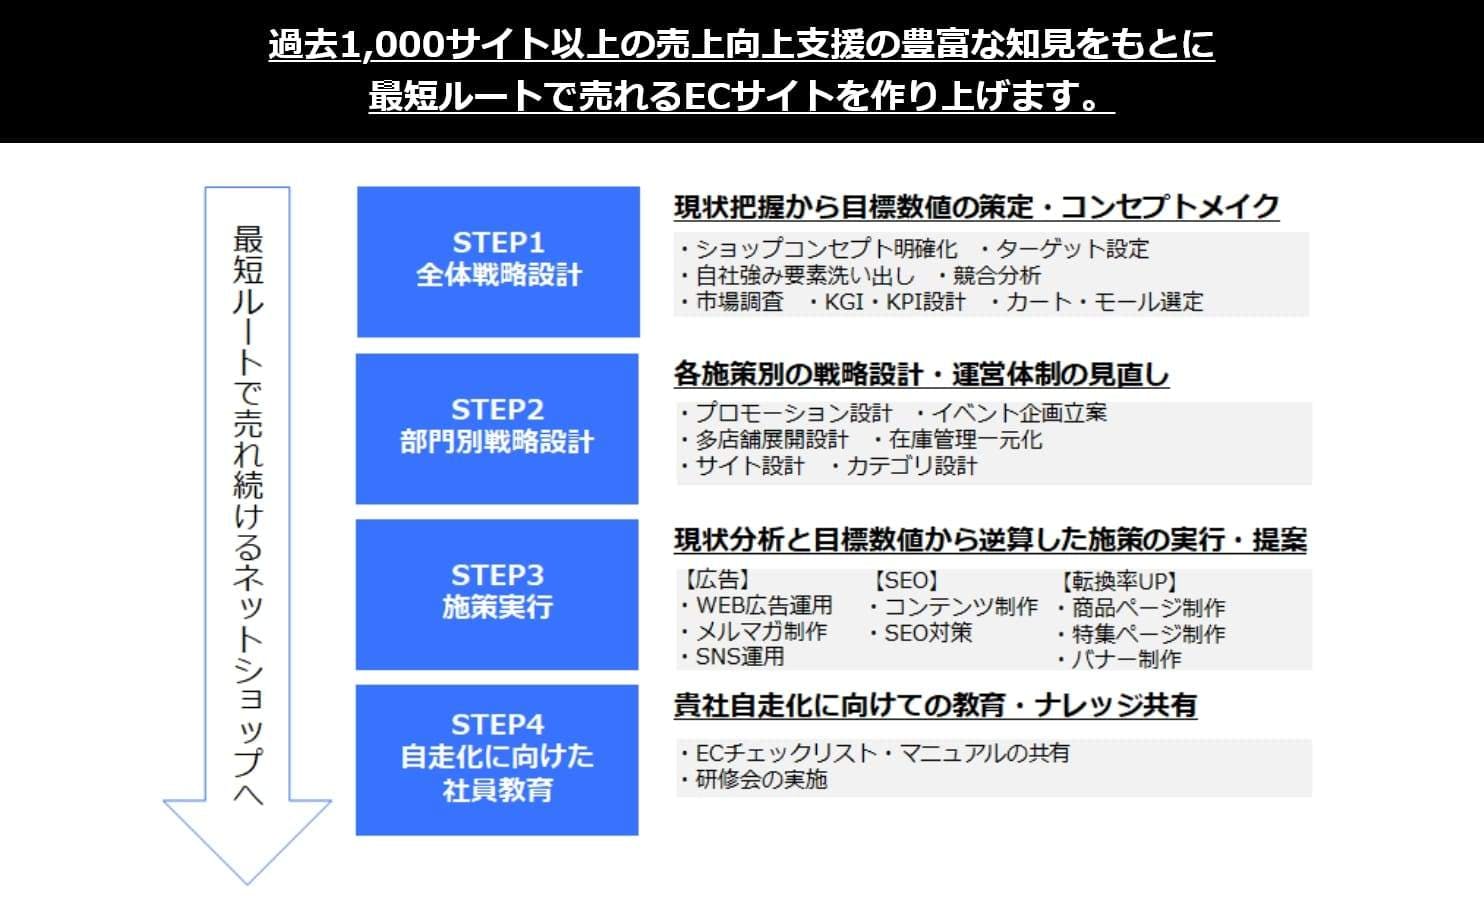 ALL WEB CONSULTING紹介画像の2枚目